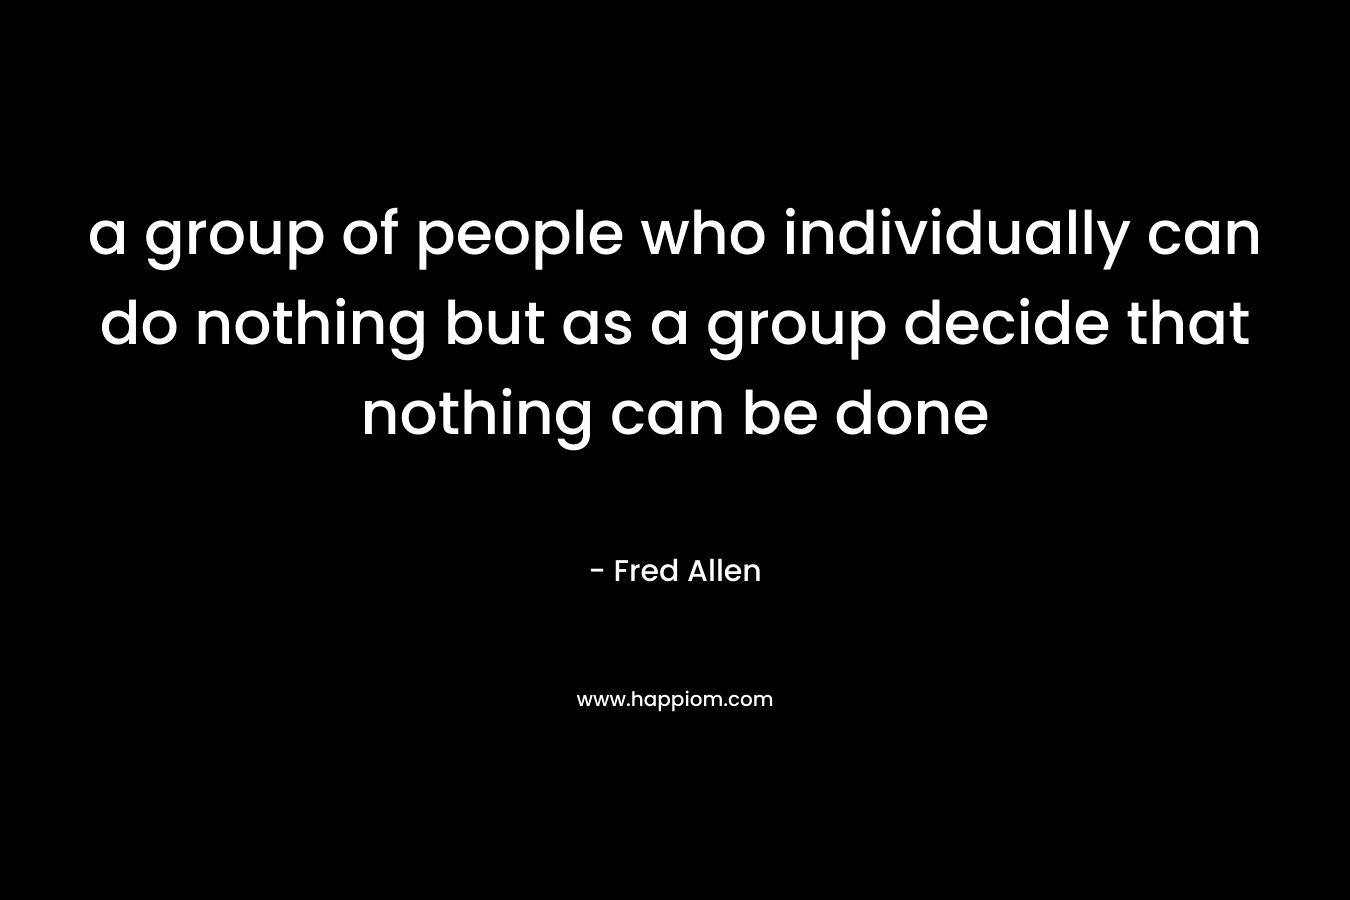 a group of people who individually can do nothing but as a group decide that nothing can be done